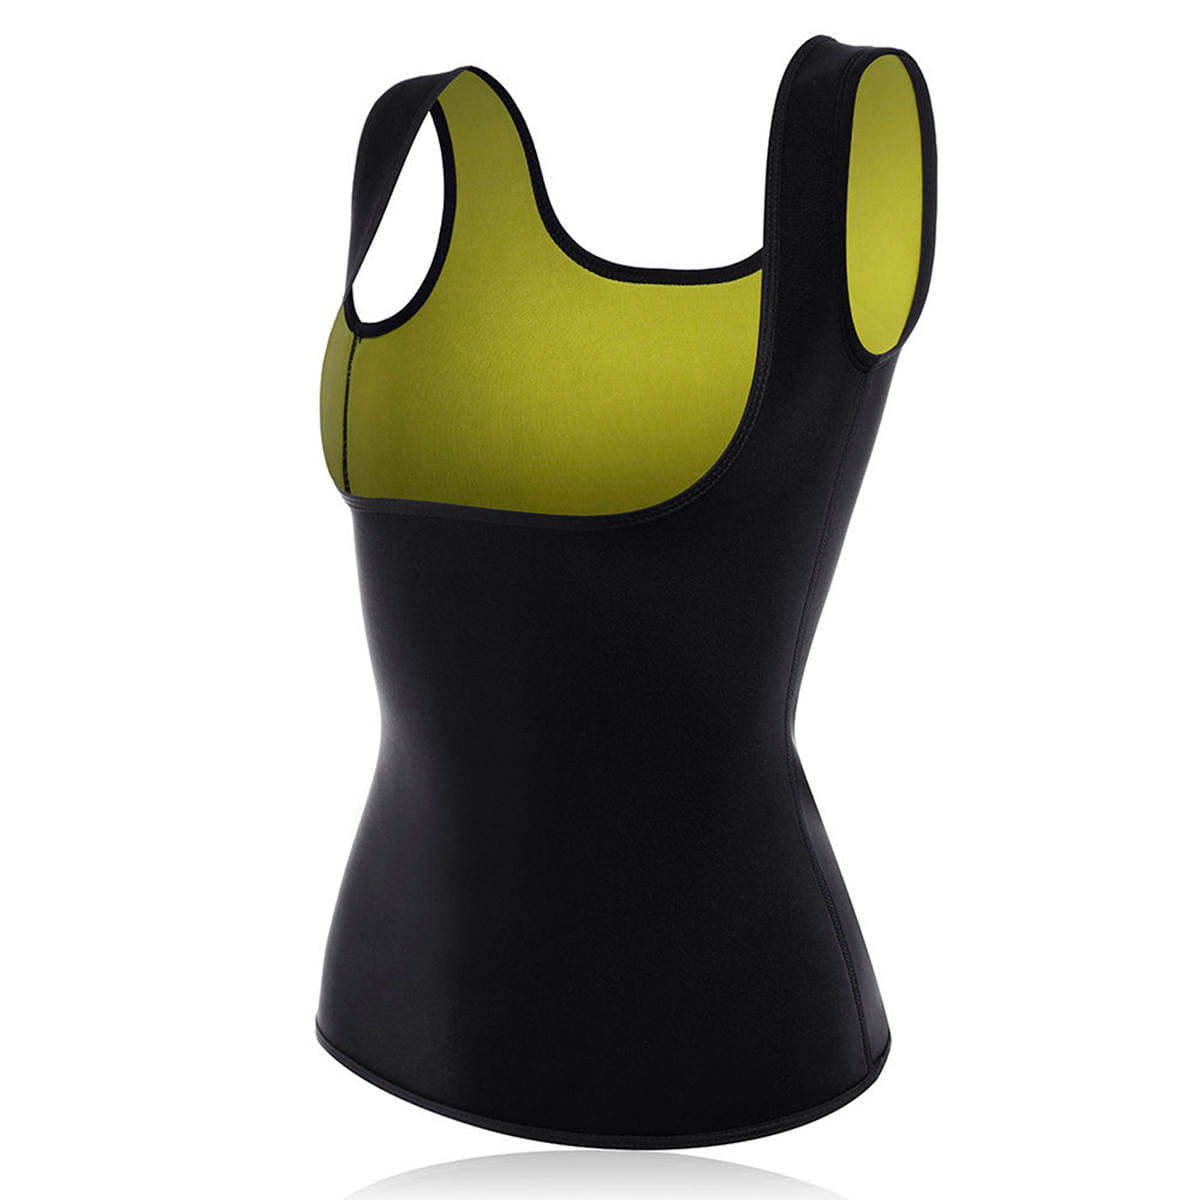 Chaleco Tubular Thermo Shapers - REDUCE MEDIDAS MUY FACILMENTE Sport Fitness - L